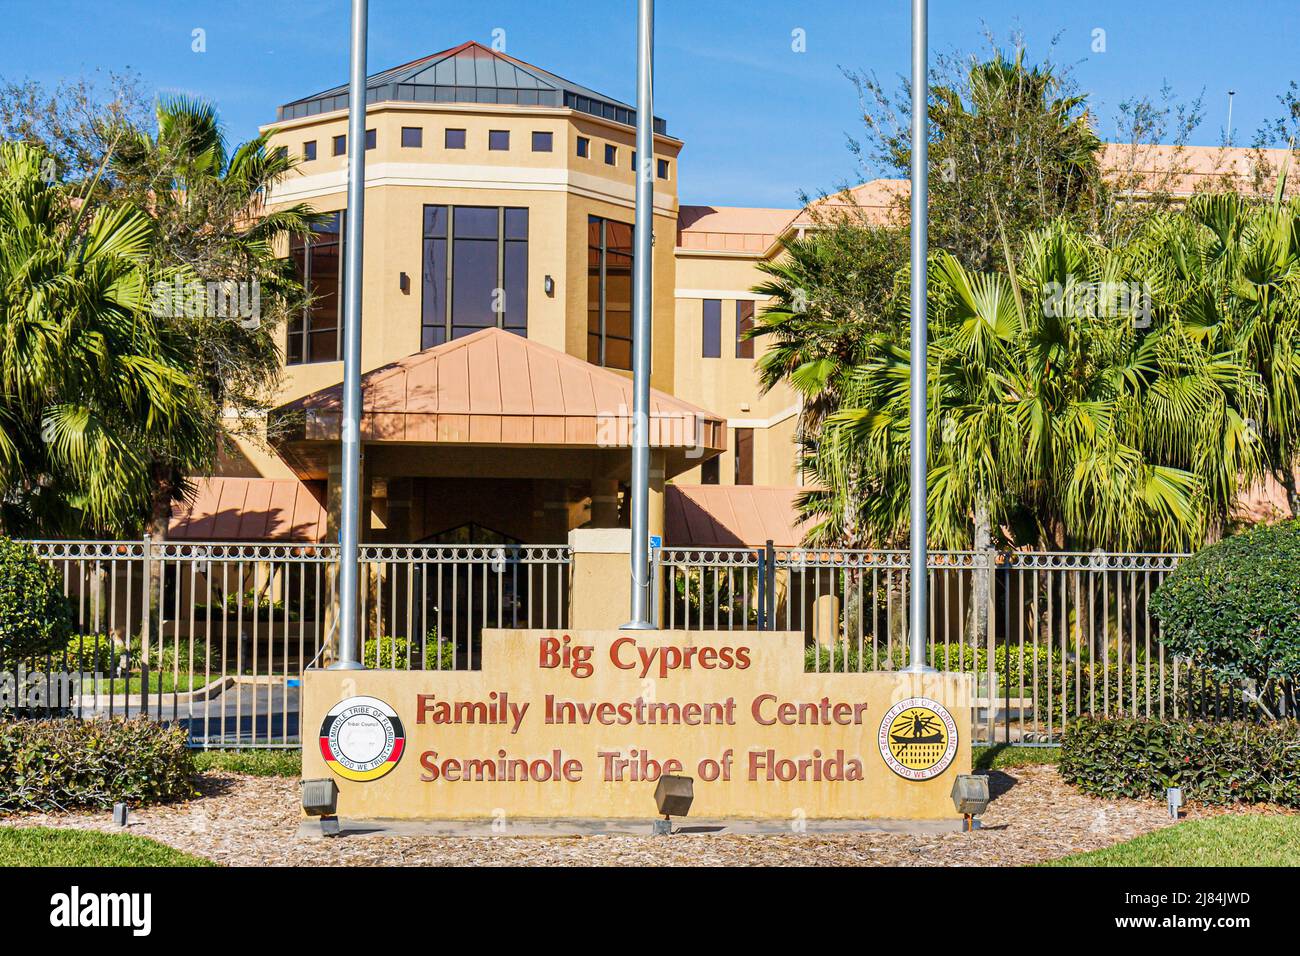 Florida Big Cypress,Seminole Reservation,Native American Indian indigenous peoples,tribe tribal government Family Investment Center centre sign shield Stock Photo